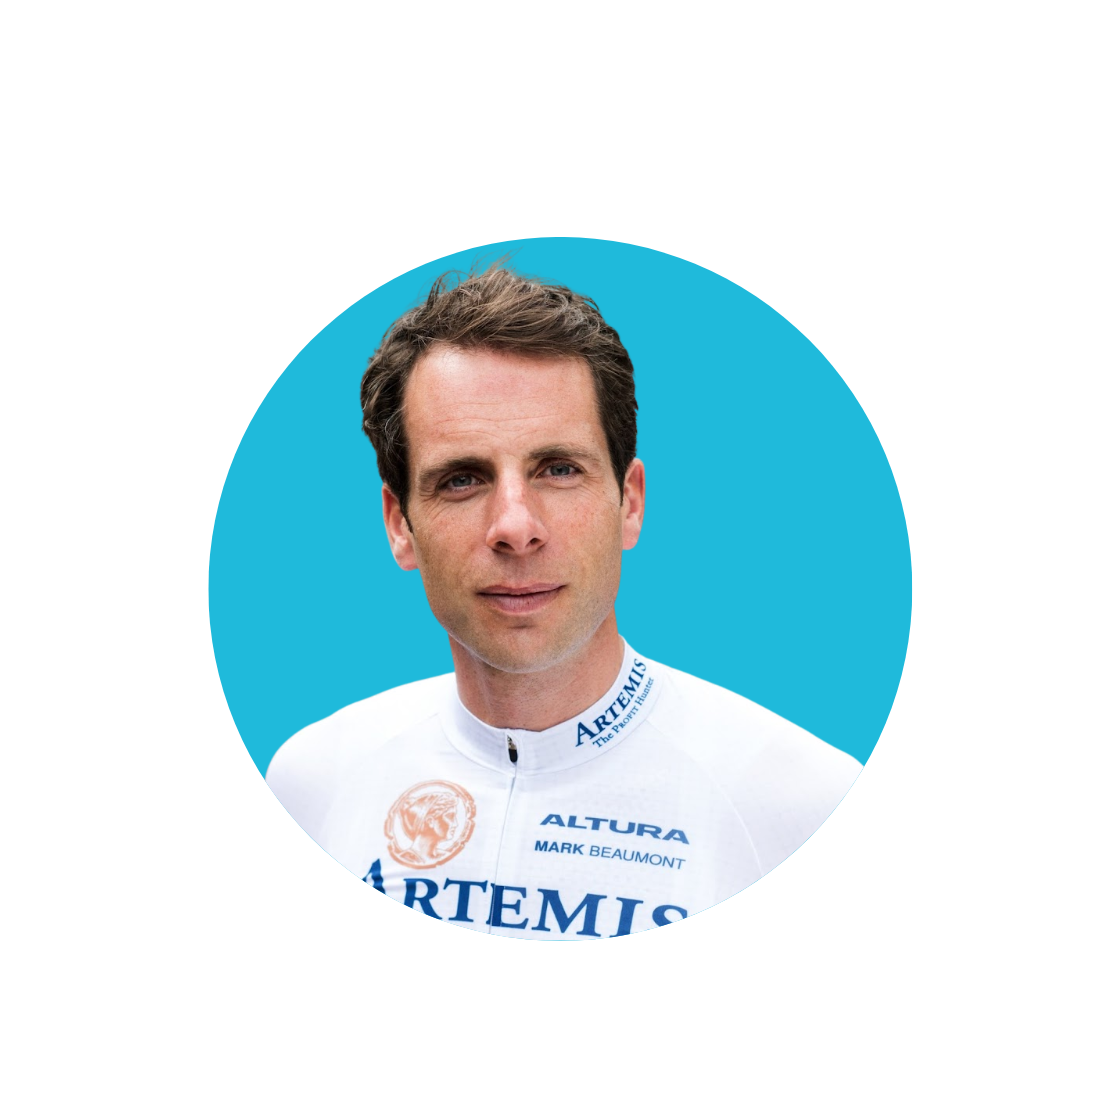 Mark Beaumont, world record holder cyclist, wearing white and blue cycling top and a blue background